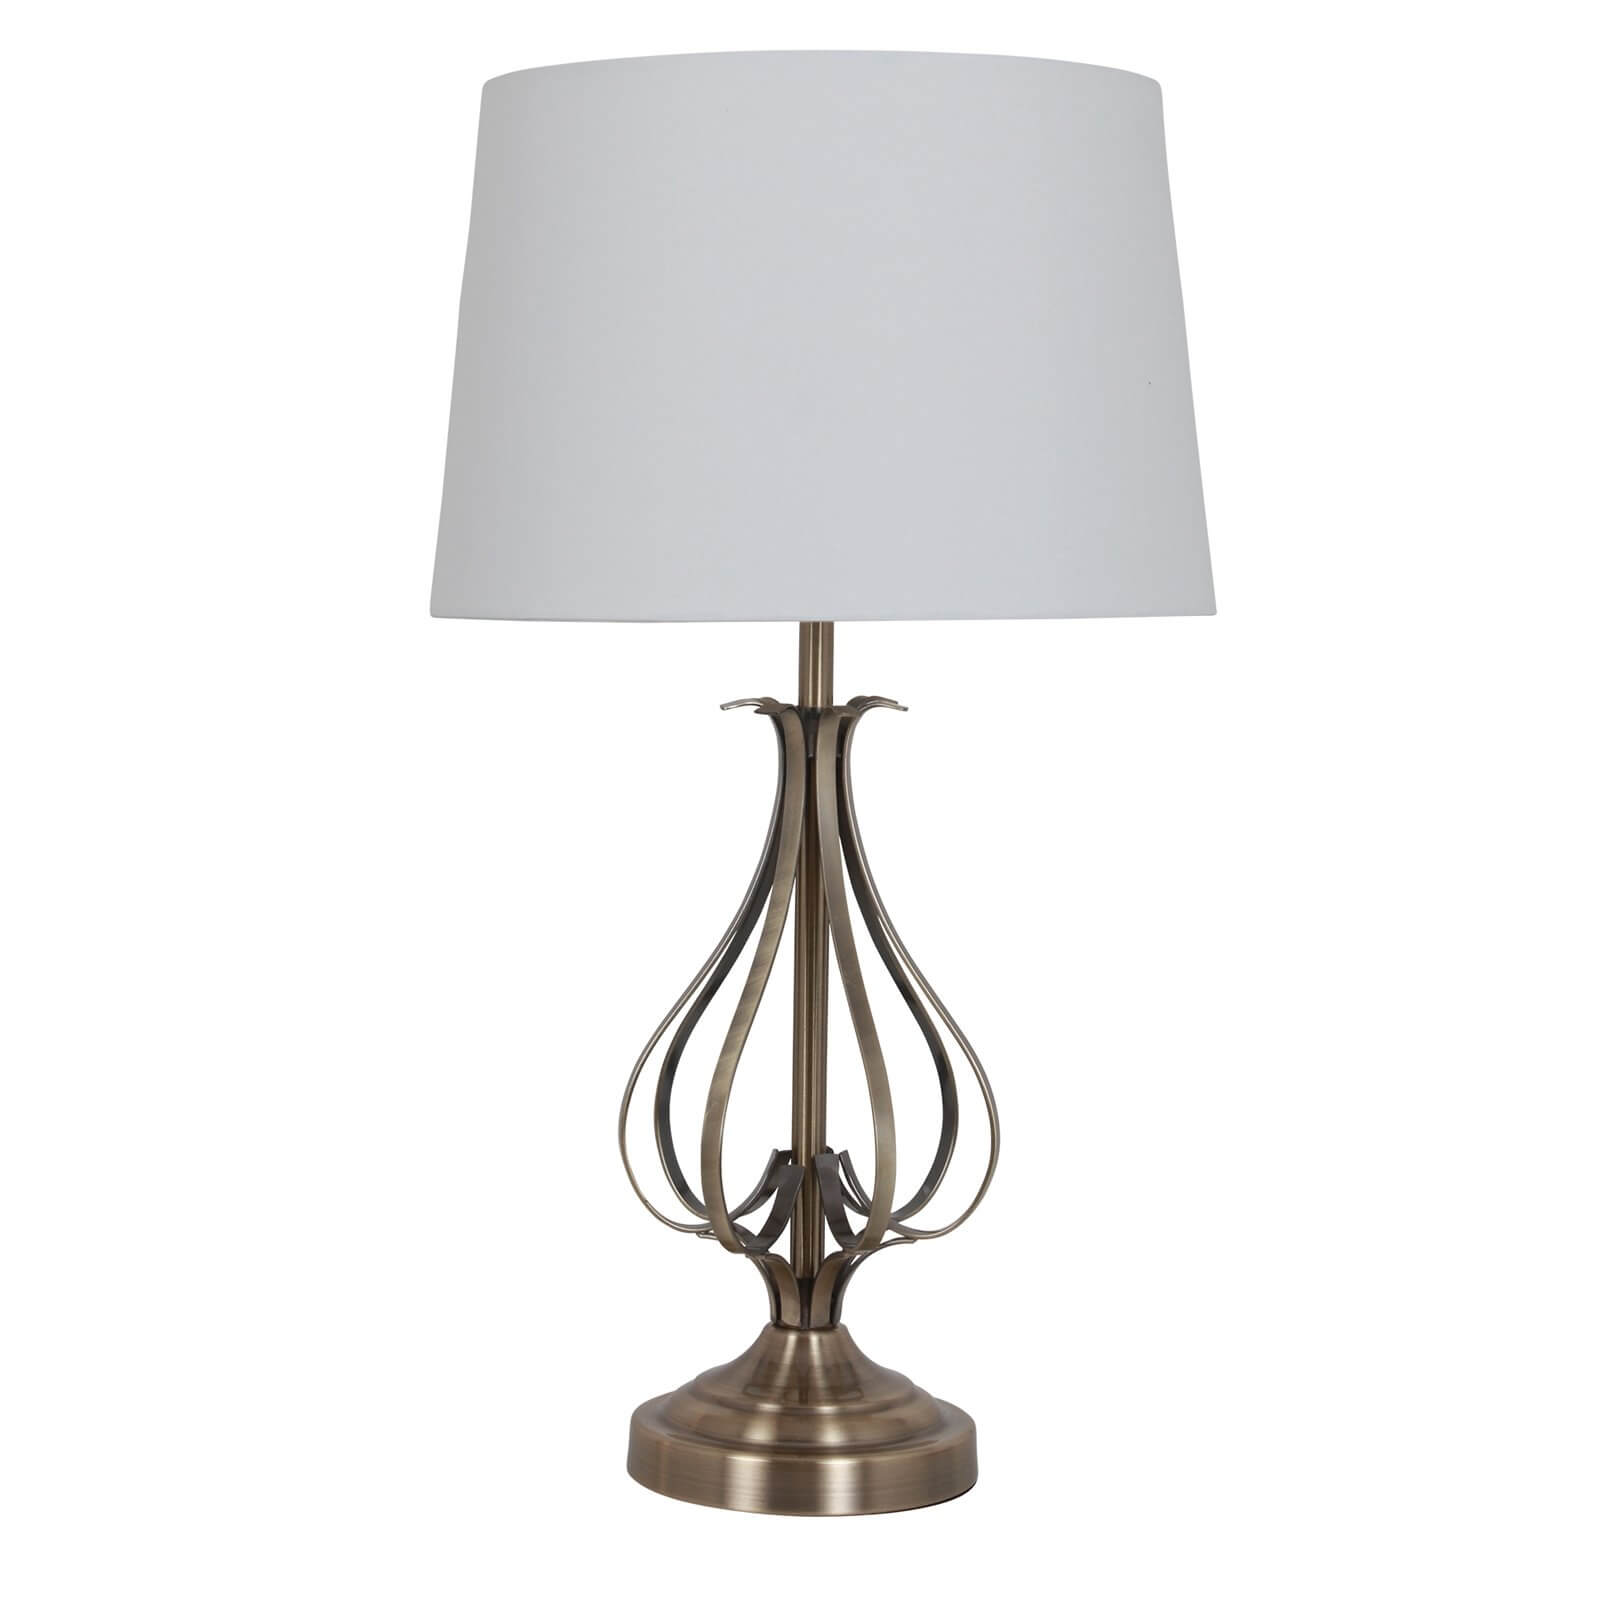 Piper Table Lamp - Antique Brass